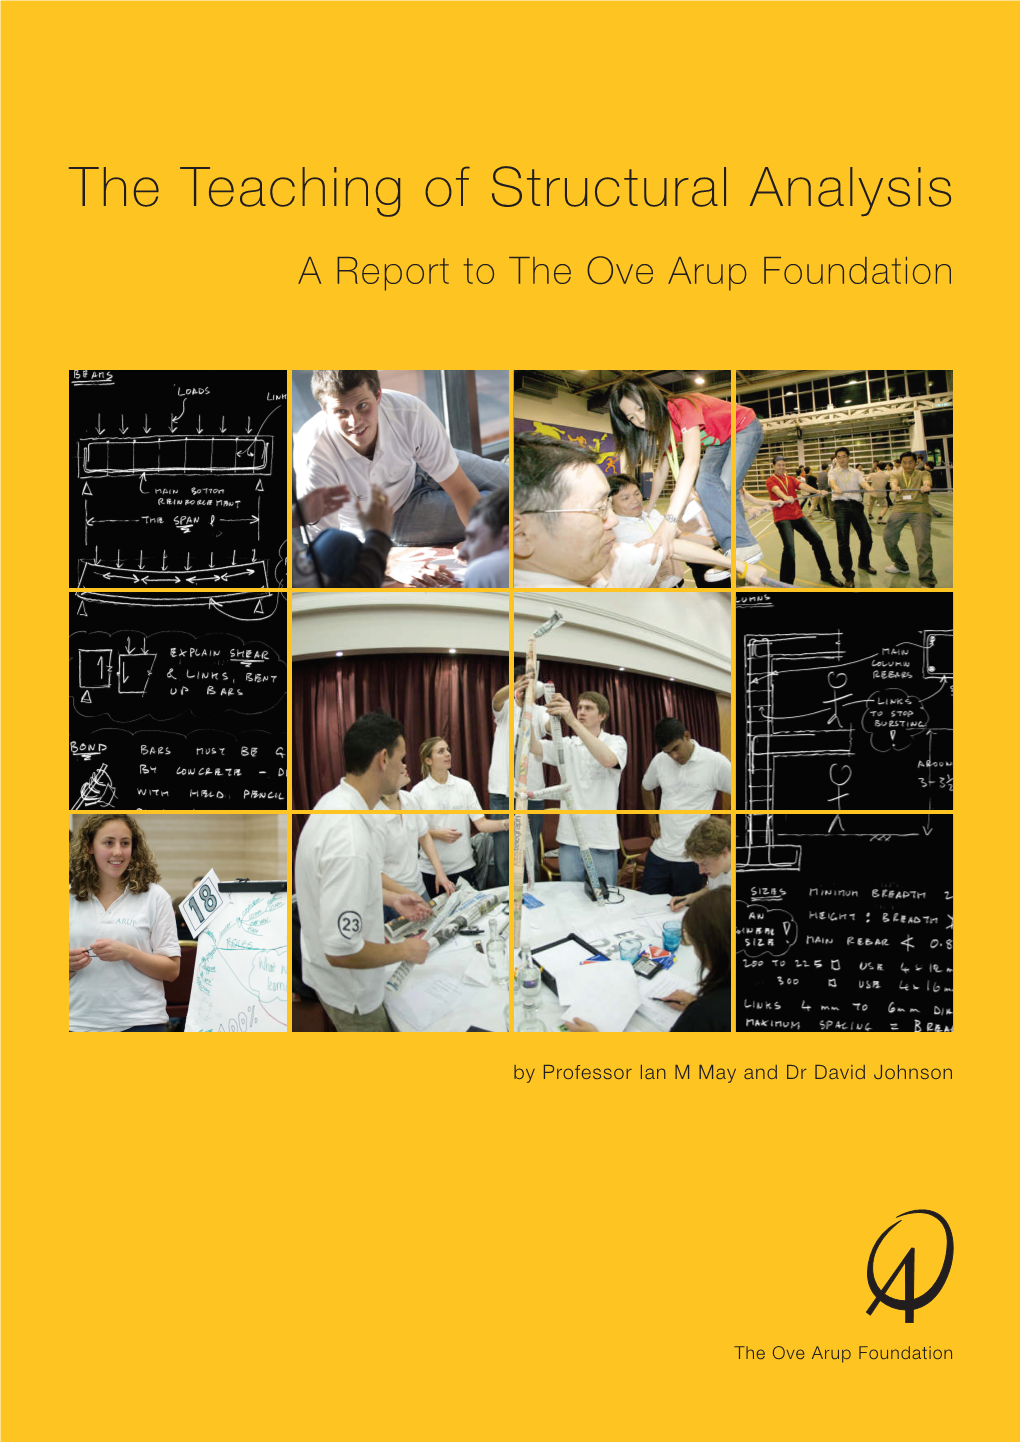 The Teaching of Structural Analysis a Report to the Ove Arup Foundation